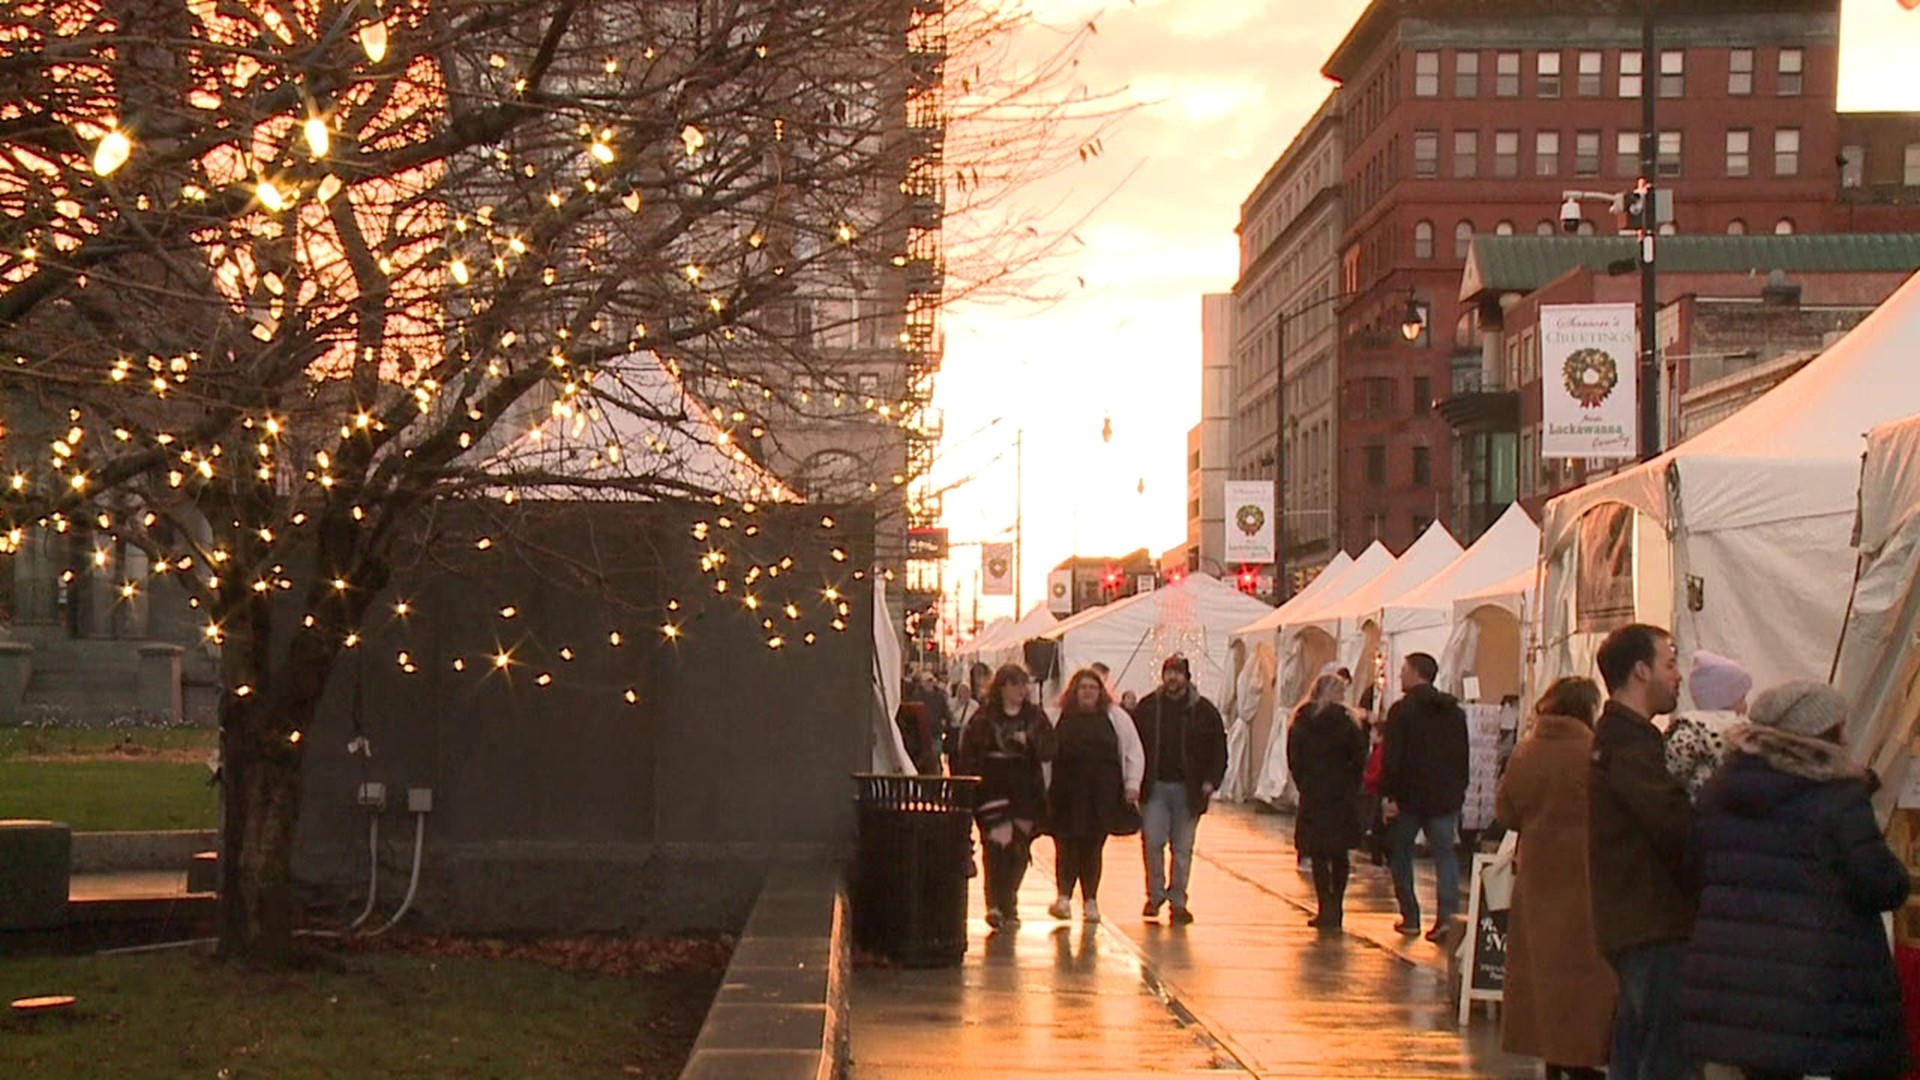 Folks braved the rainy weather for the holiday event in downtown Scranton.